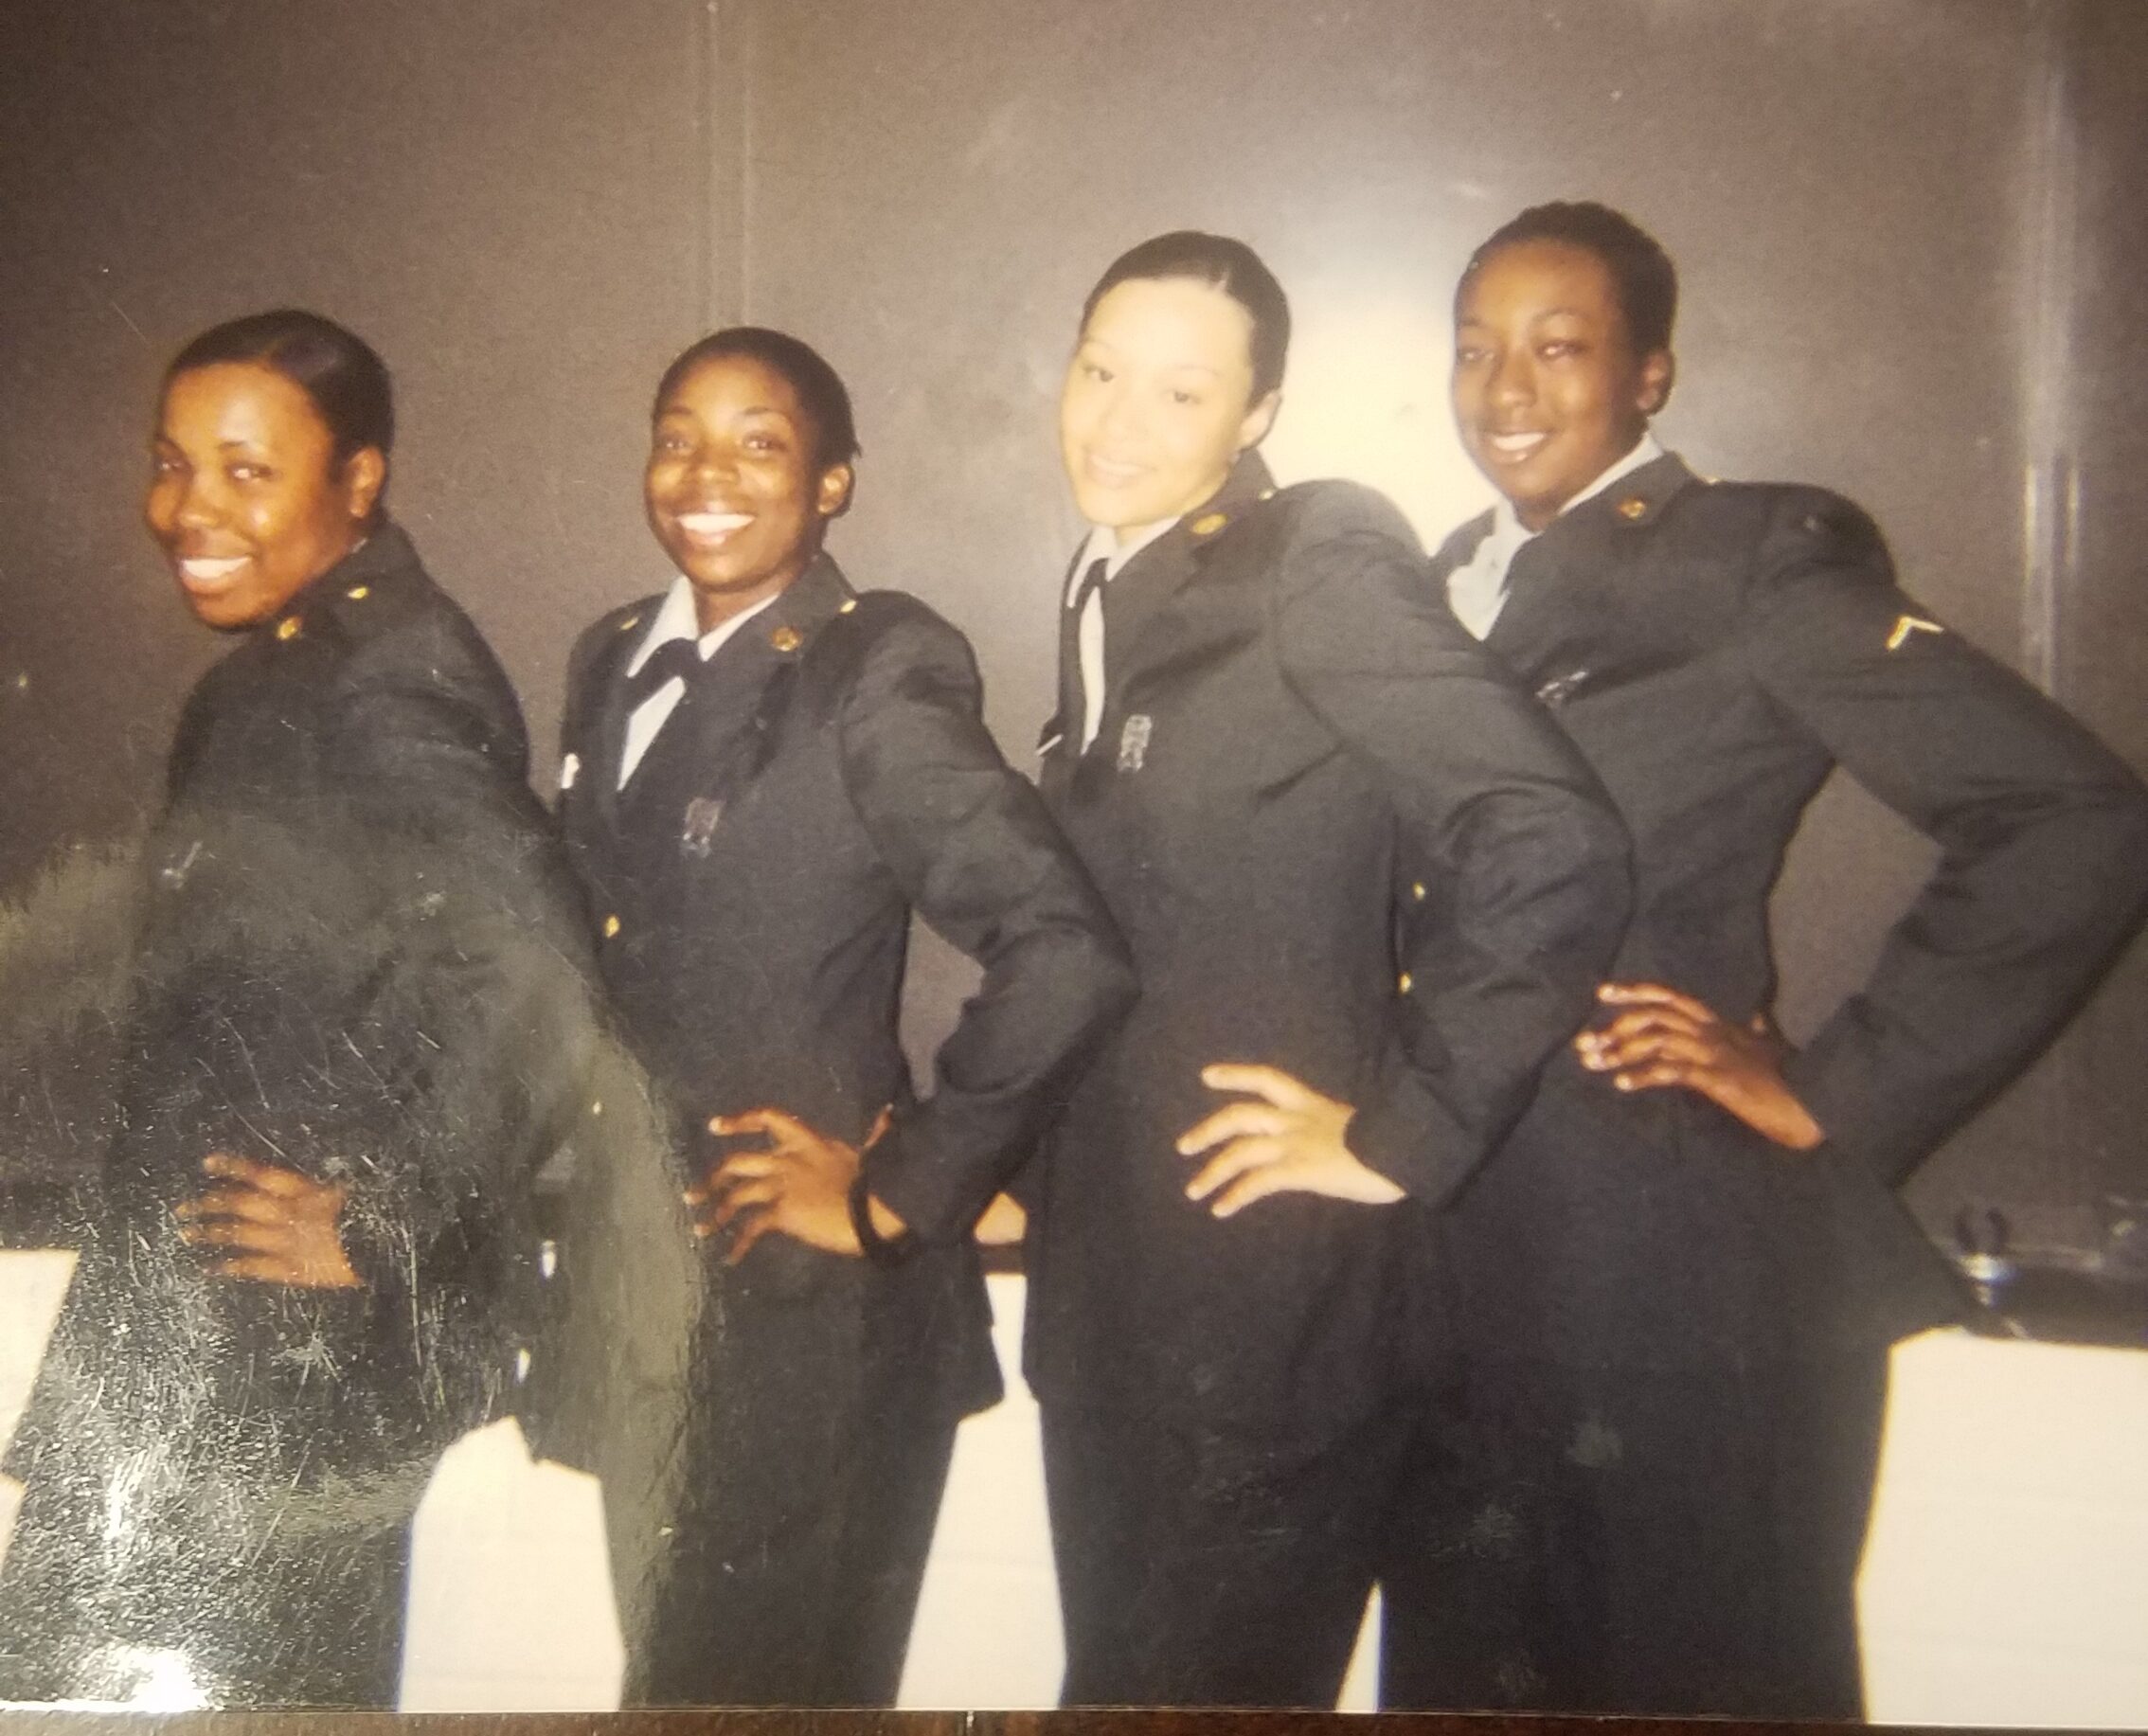 Deidra in the military with soldier friends